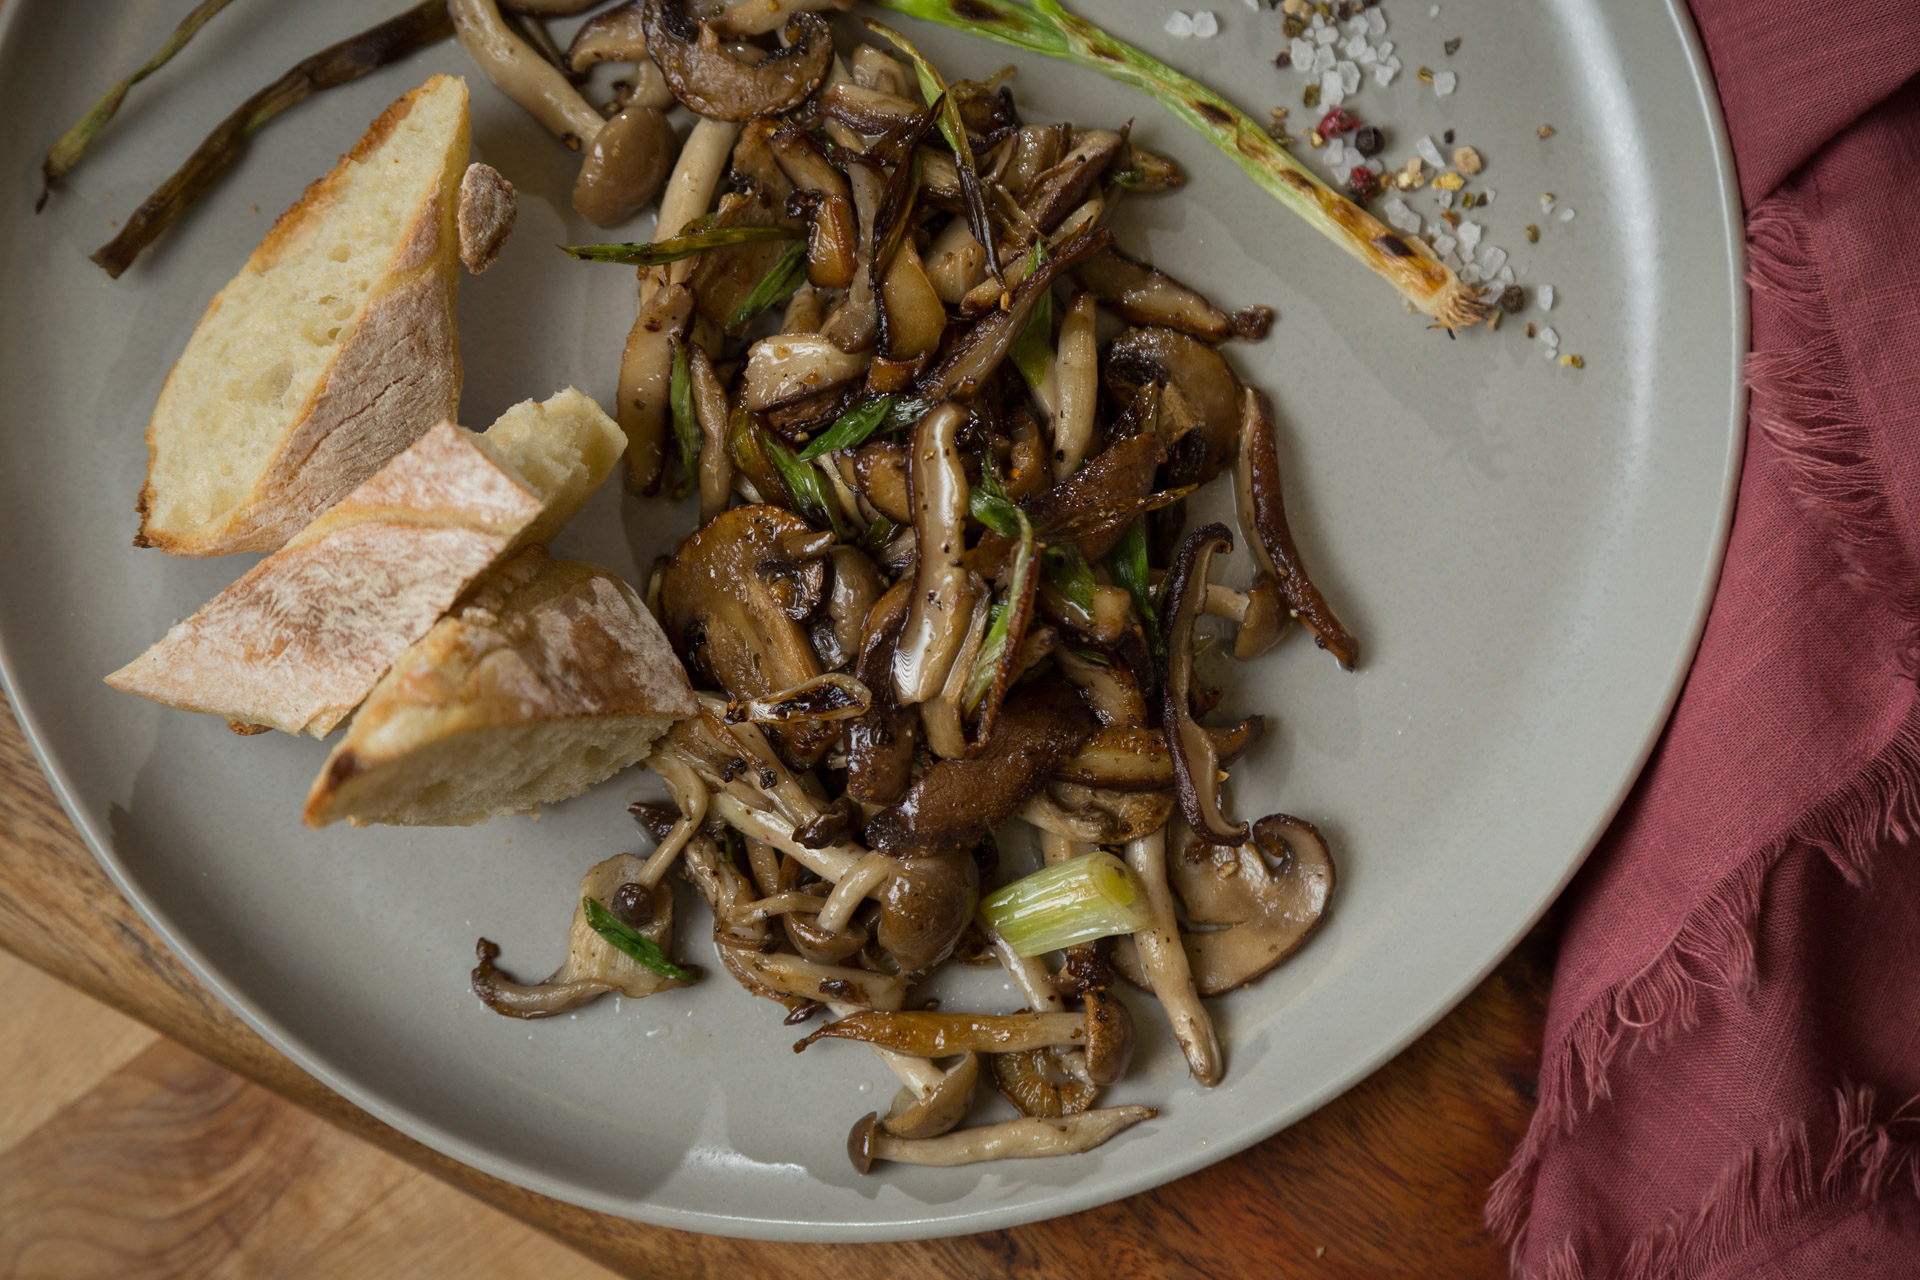 Mushroom appetizer with toasted bread